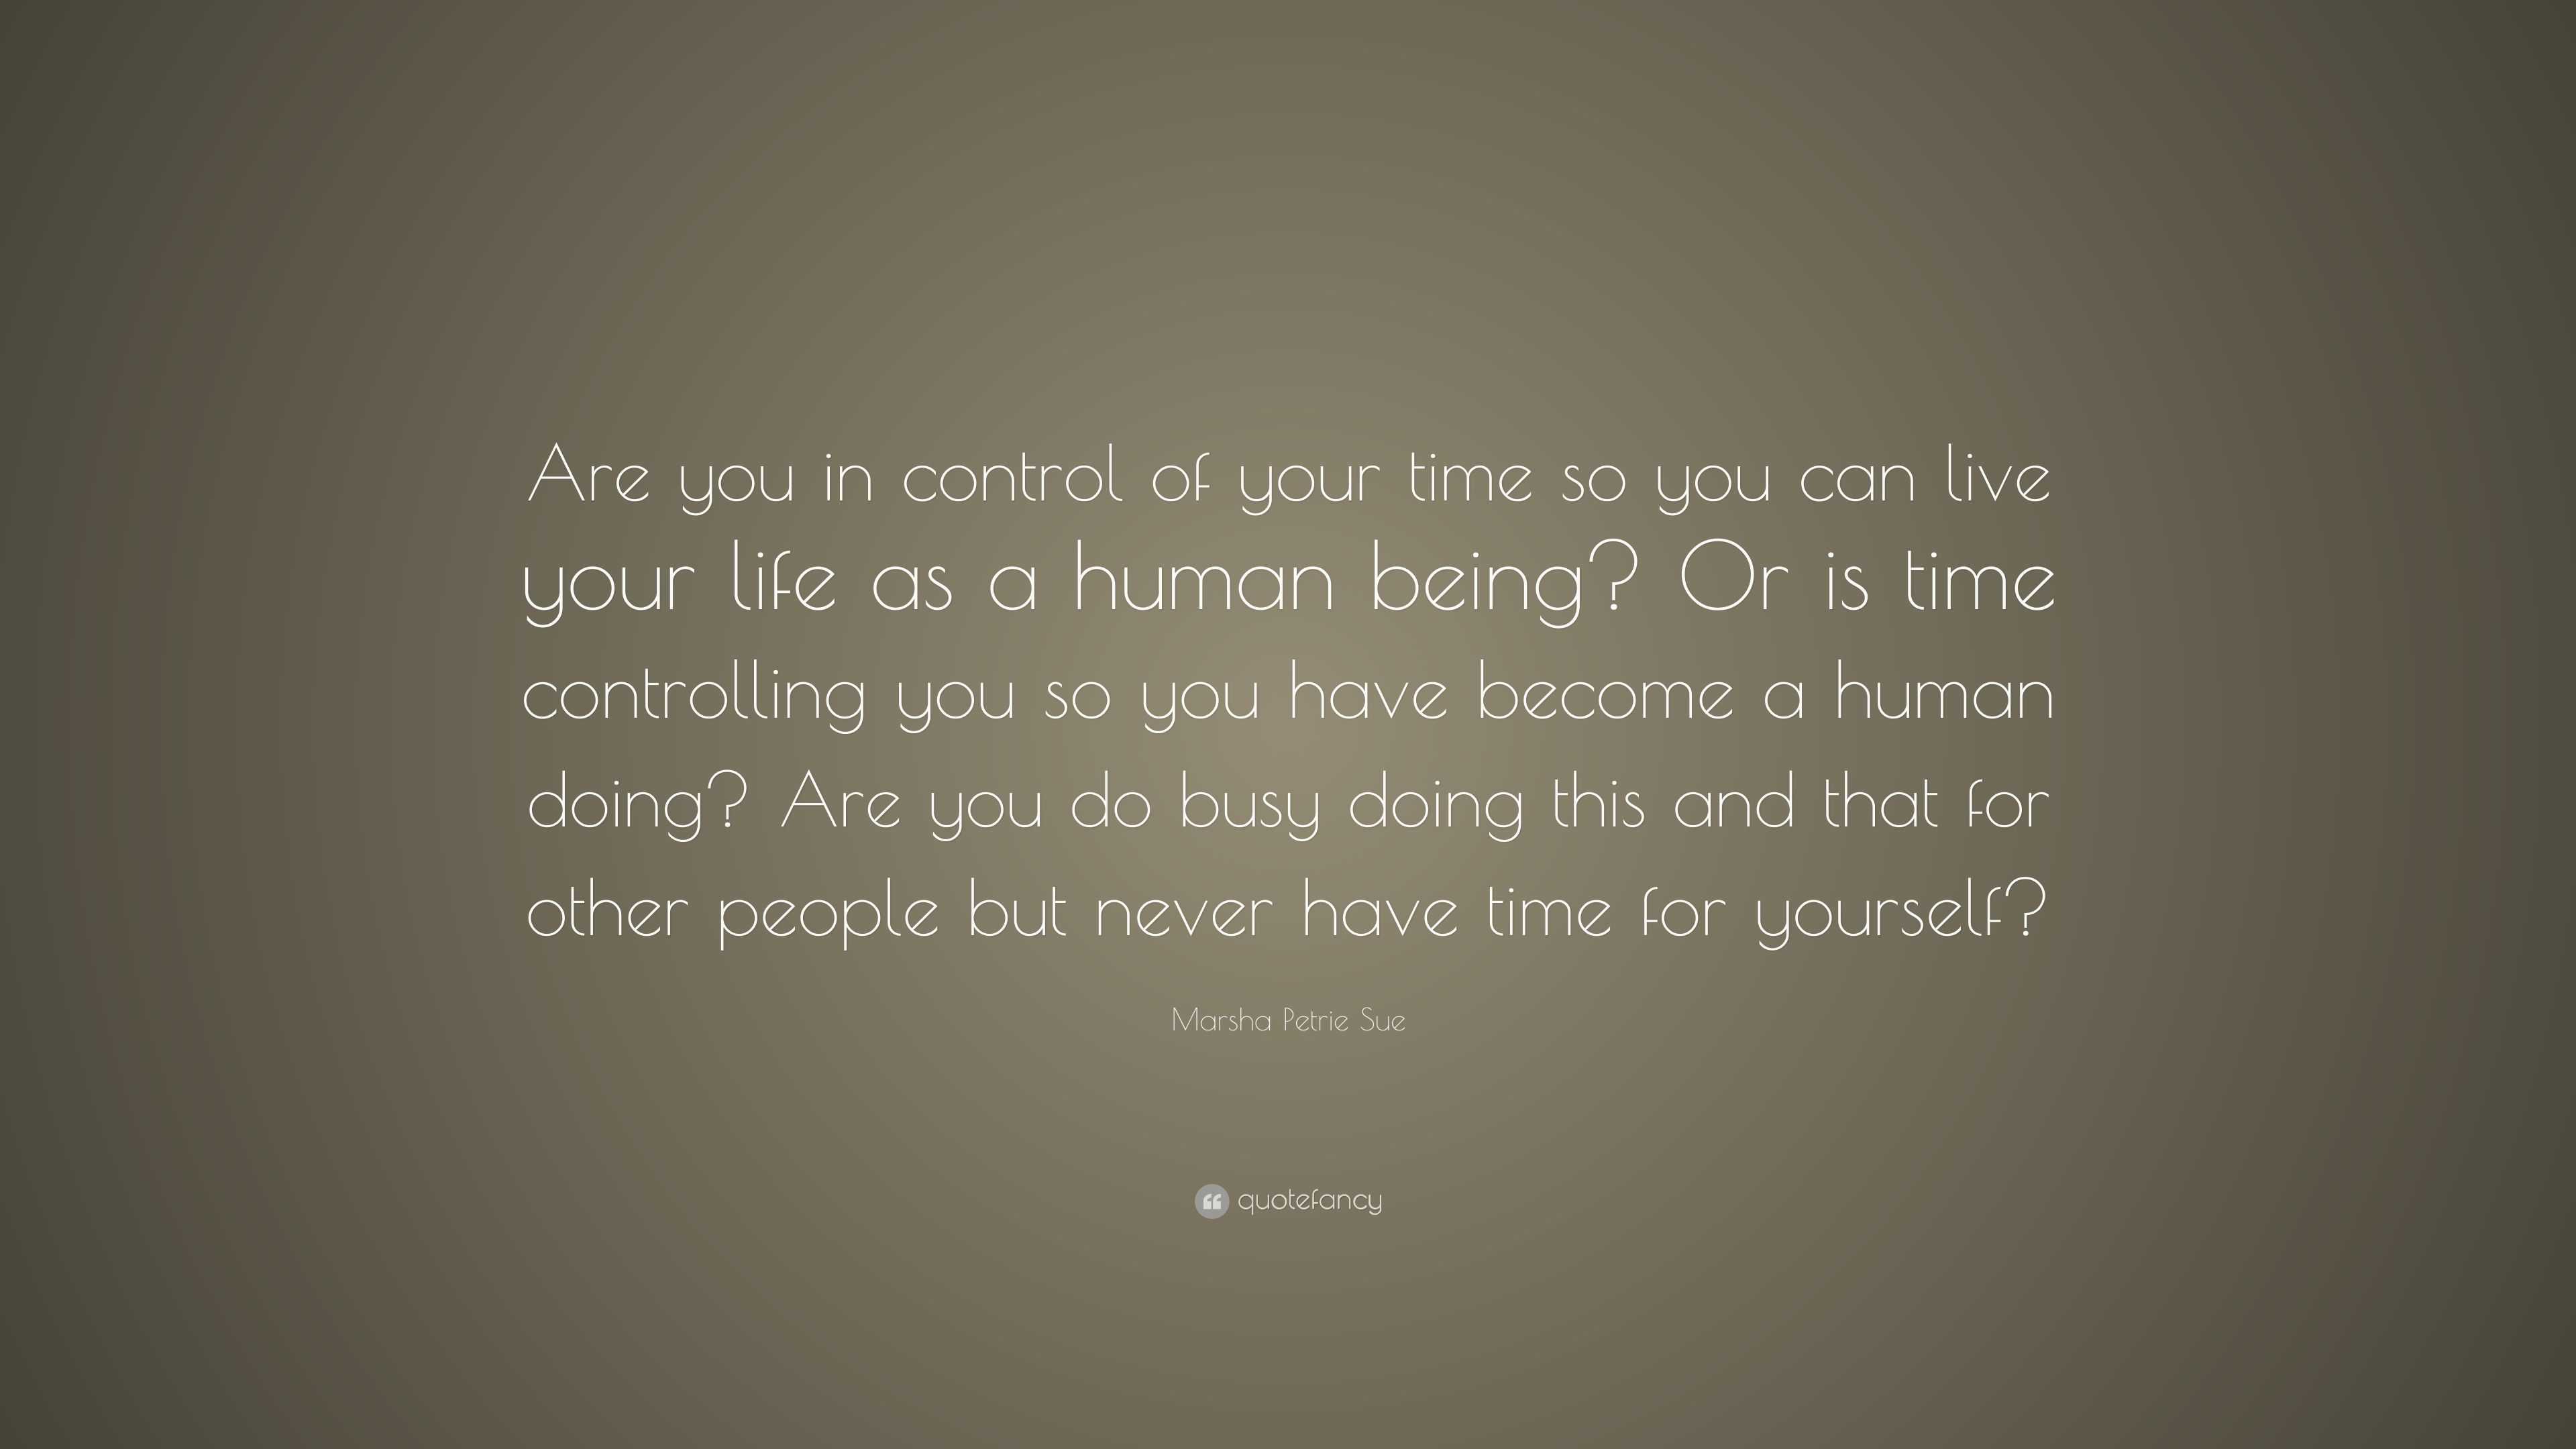 live your life for yourself quotes marsha petrie sue quote u201care you in control of your time so you